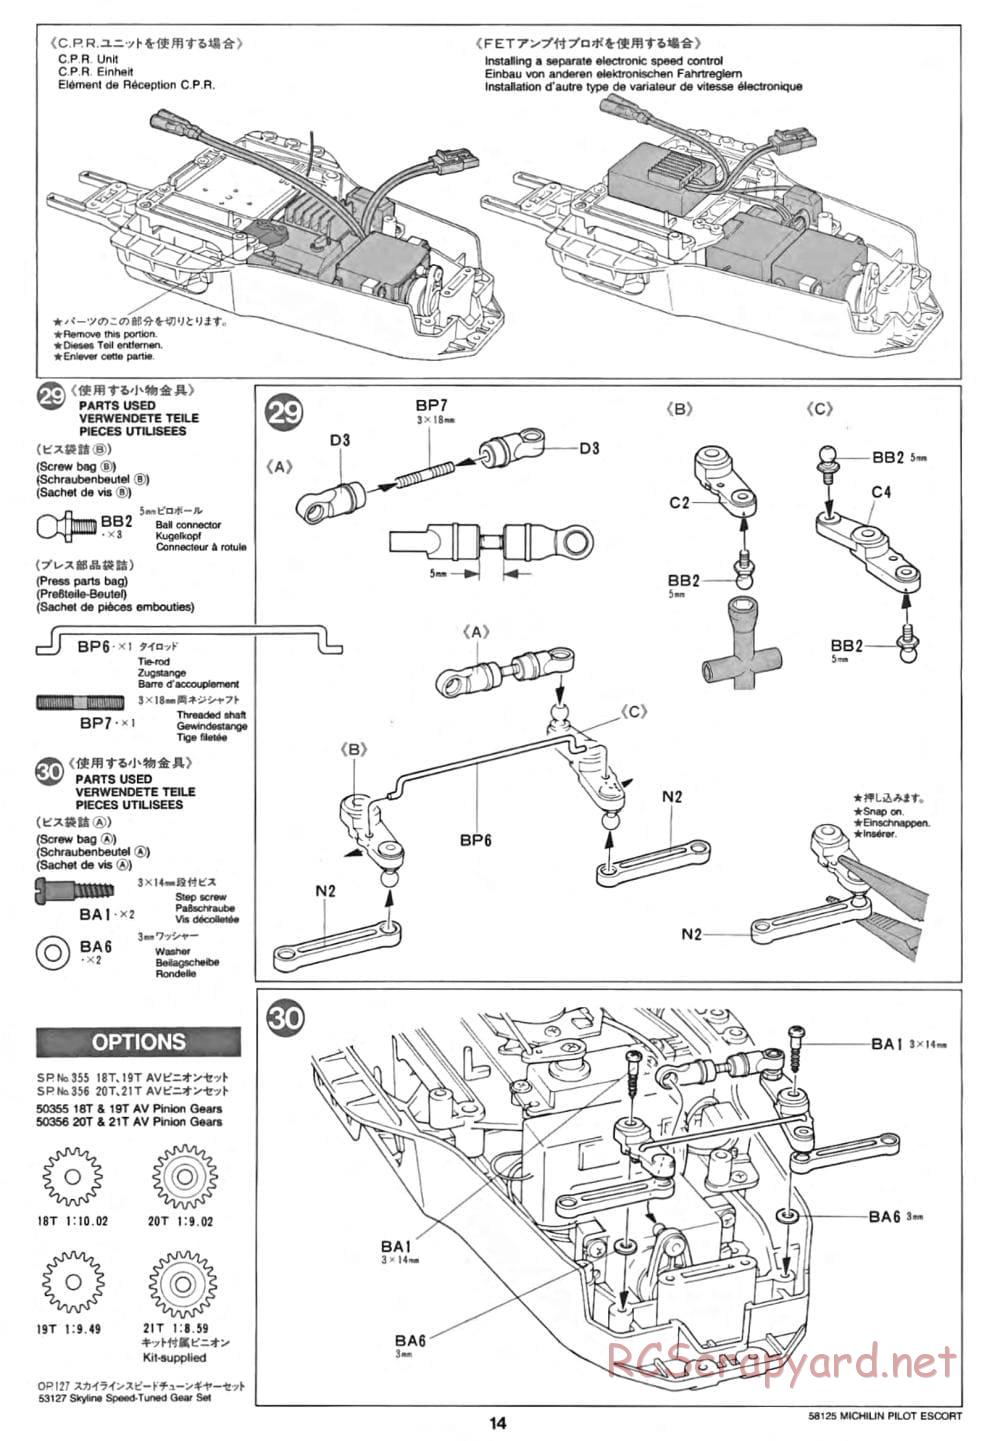 Tamiya - Michelin Pilot Ford Escort RS Cosworth - TA-01 Chassis - Manual - Page 14